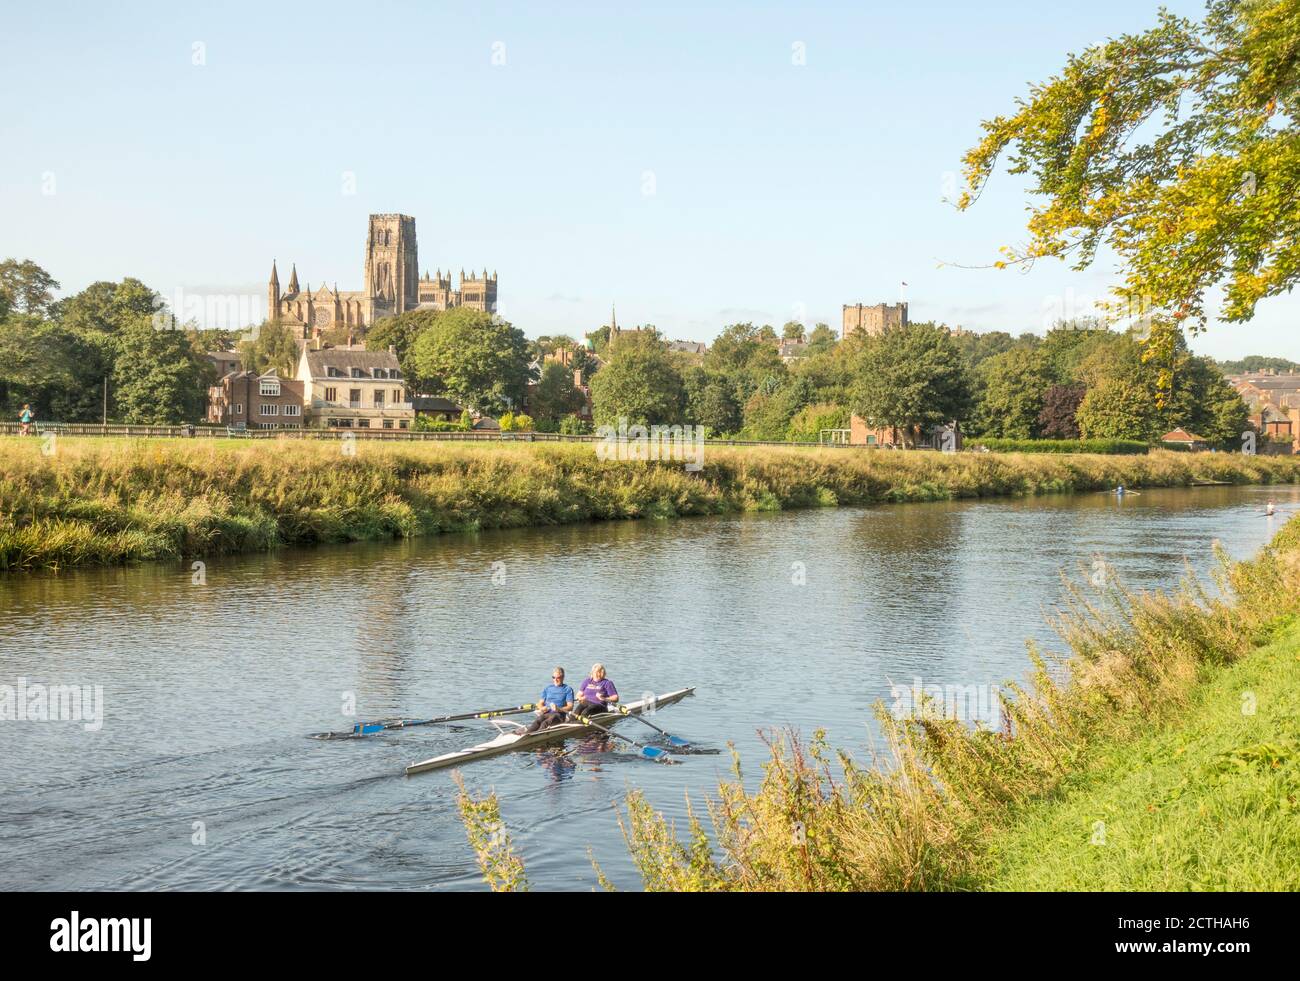 Mature couple skulling or rowing on the river with the cathedral and castle in the background, Durham city, Co. Durham, England, UK Stock Photo